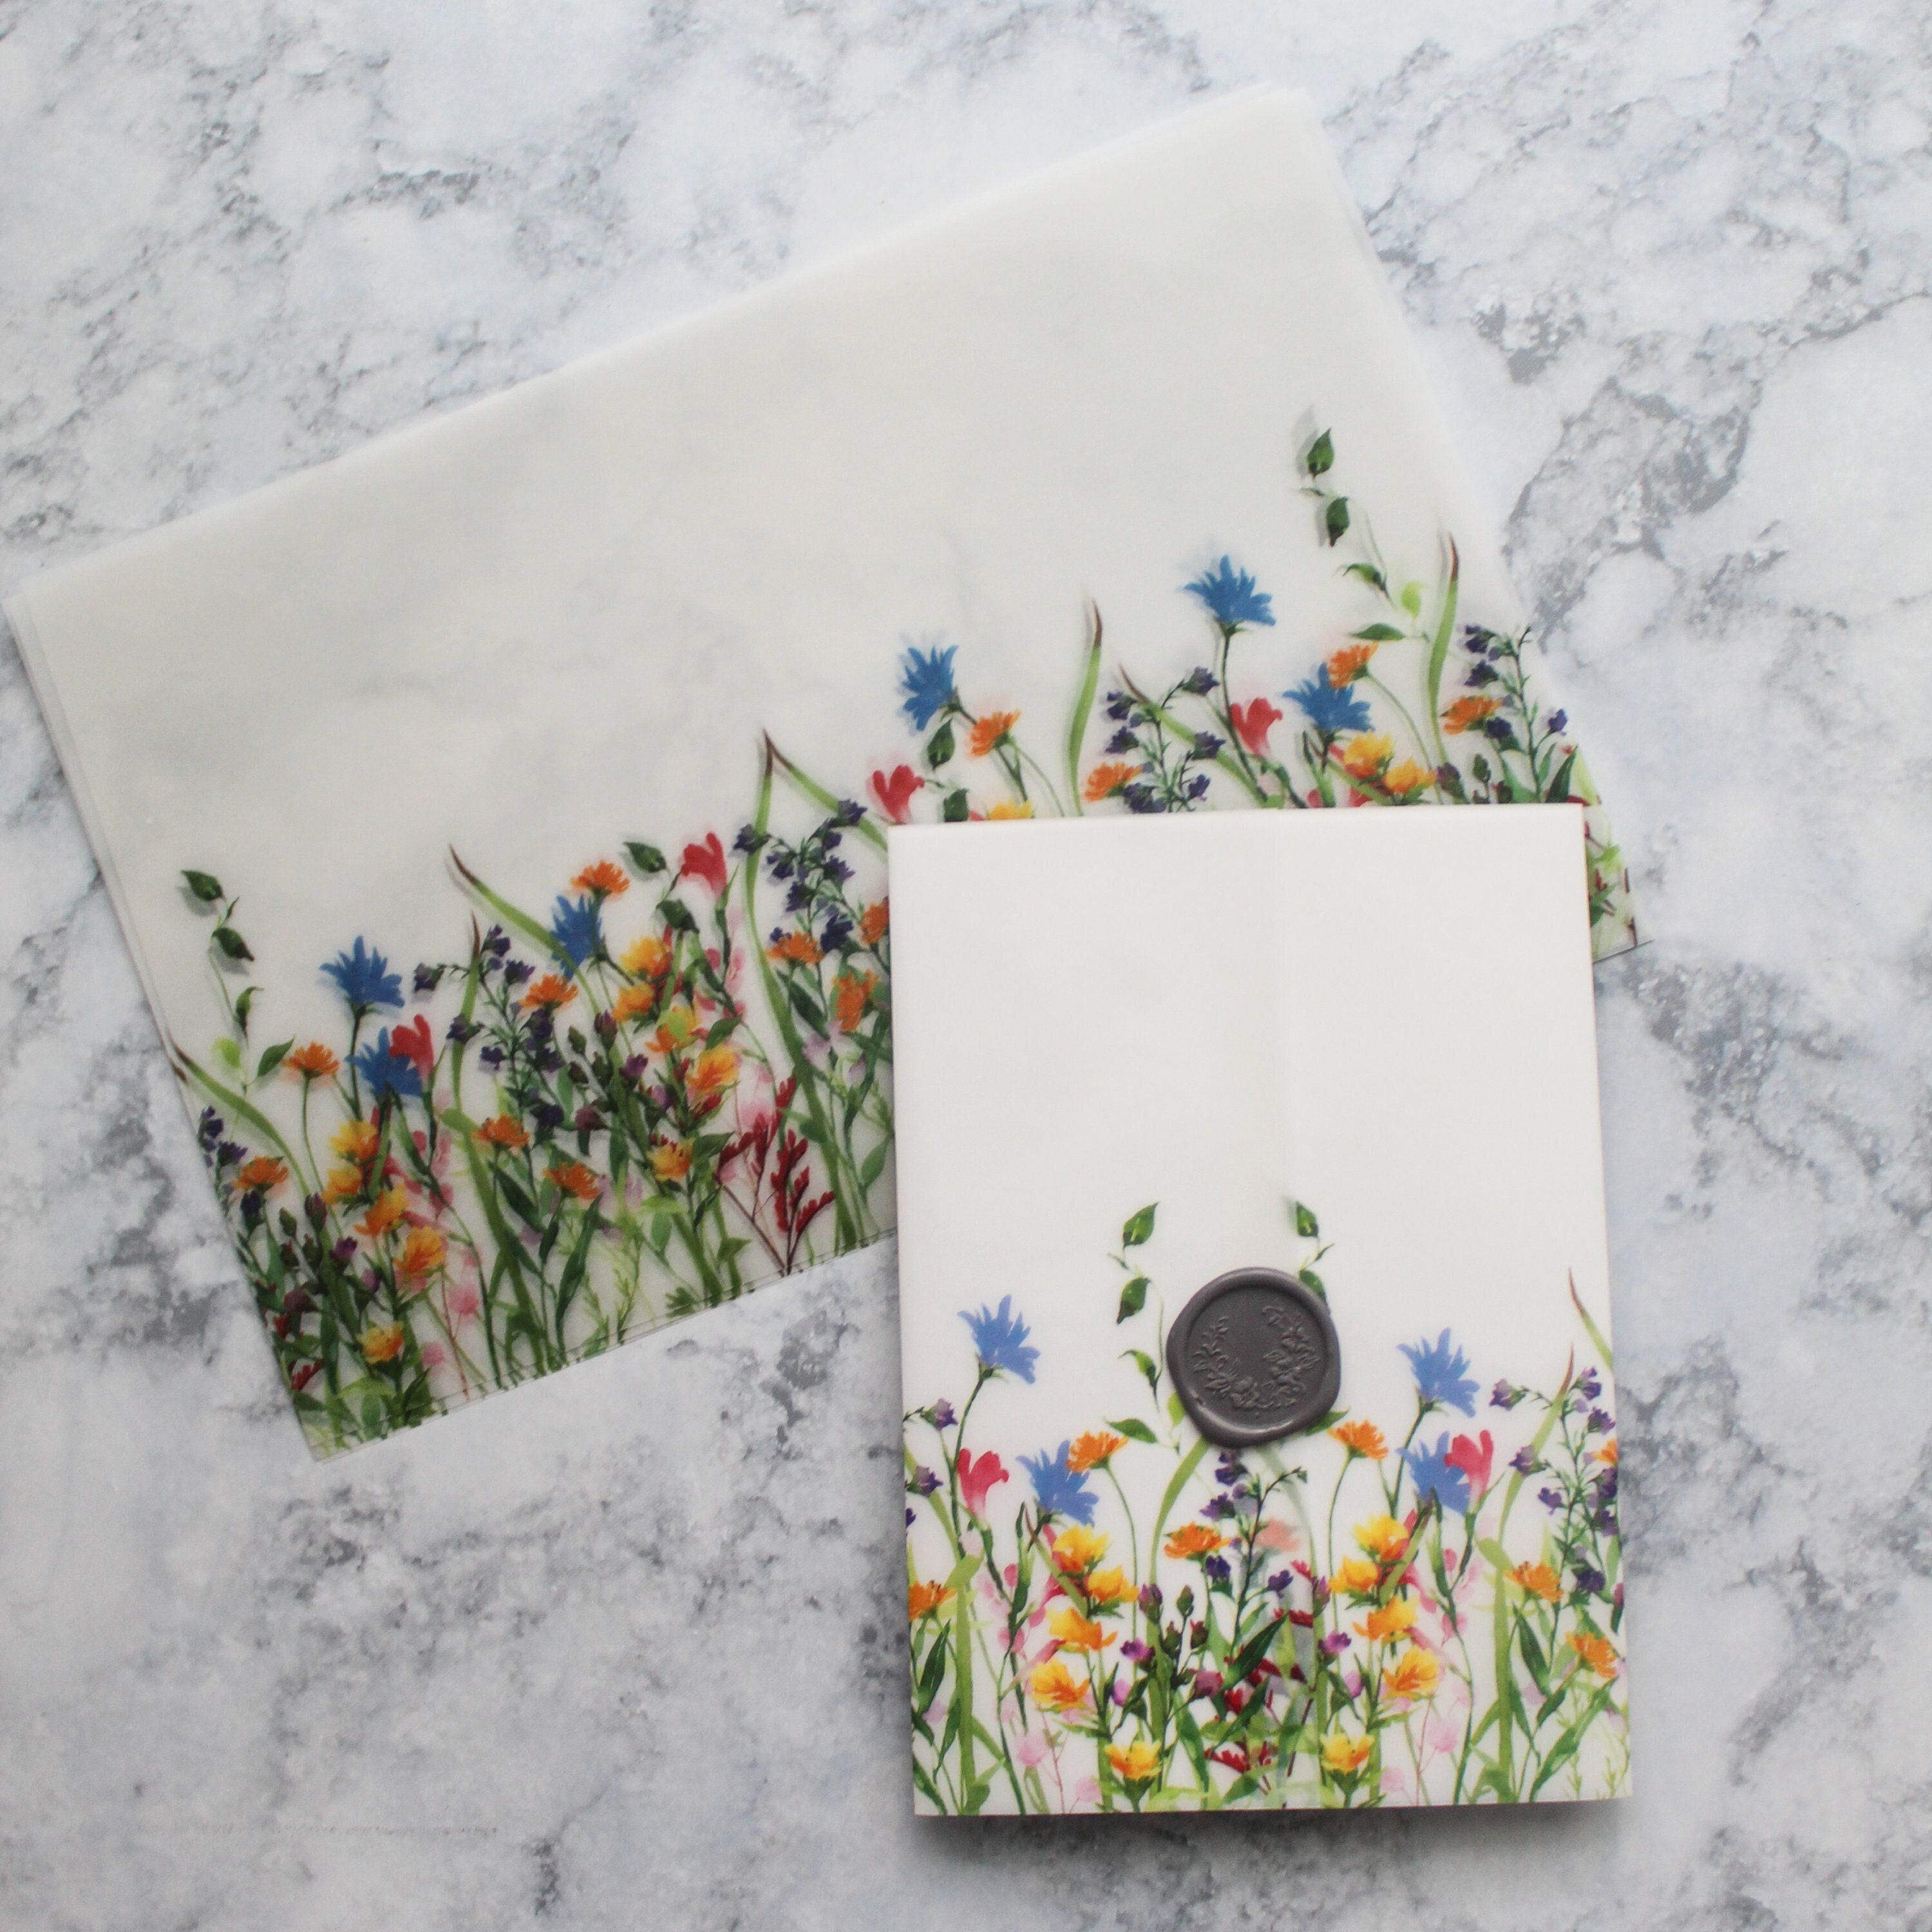 LAARIA Pre-Folded Vellum Jackets for Invitations: 5x7 Translucent Vellum  Paper with Adhesive Stickers & Natural Dried Pressed Flowers - Translucent